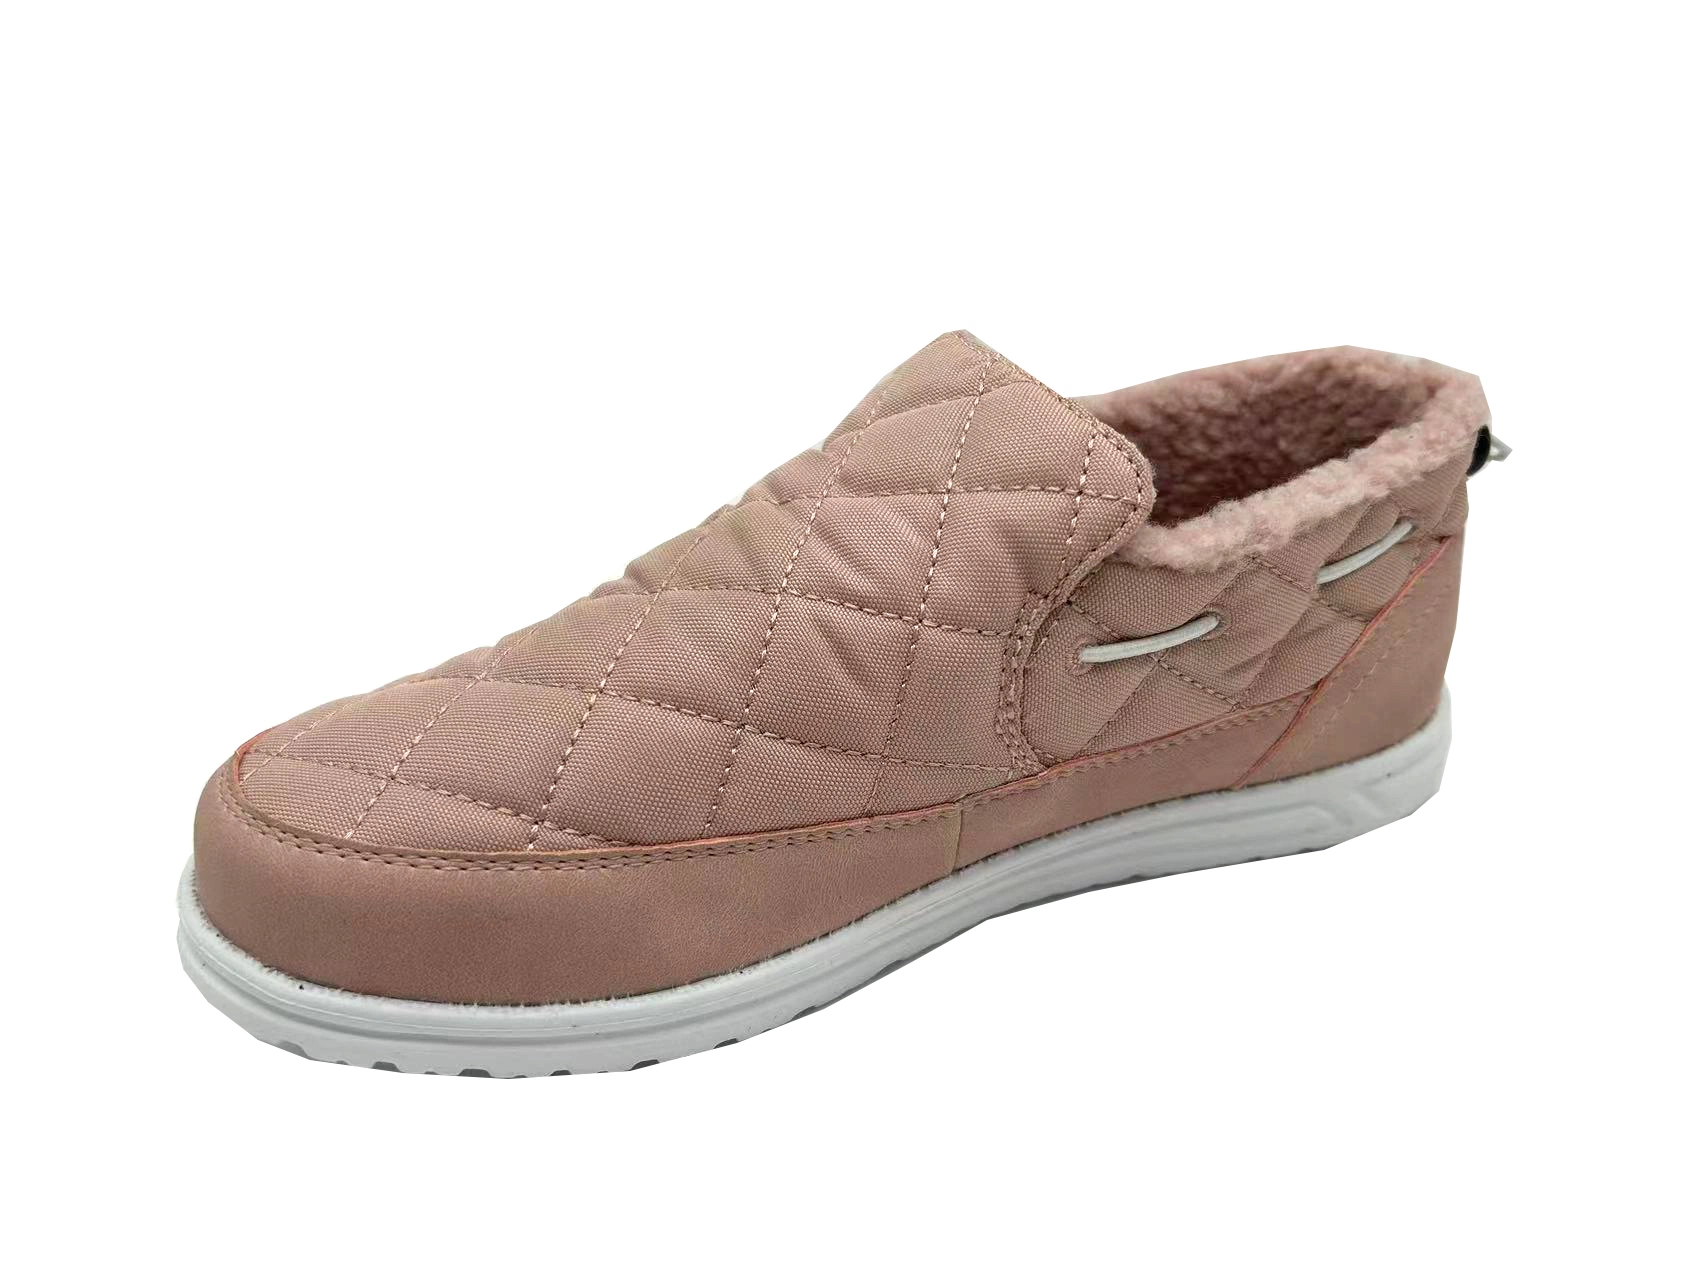 Ladies Casual Sneakers Spring Autumn Fashion Pink Shoes Breathable Slip on Sports Footwear